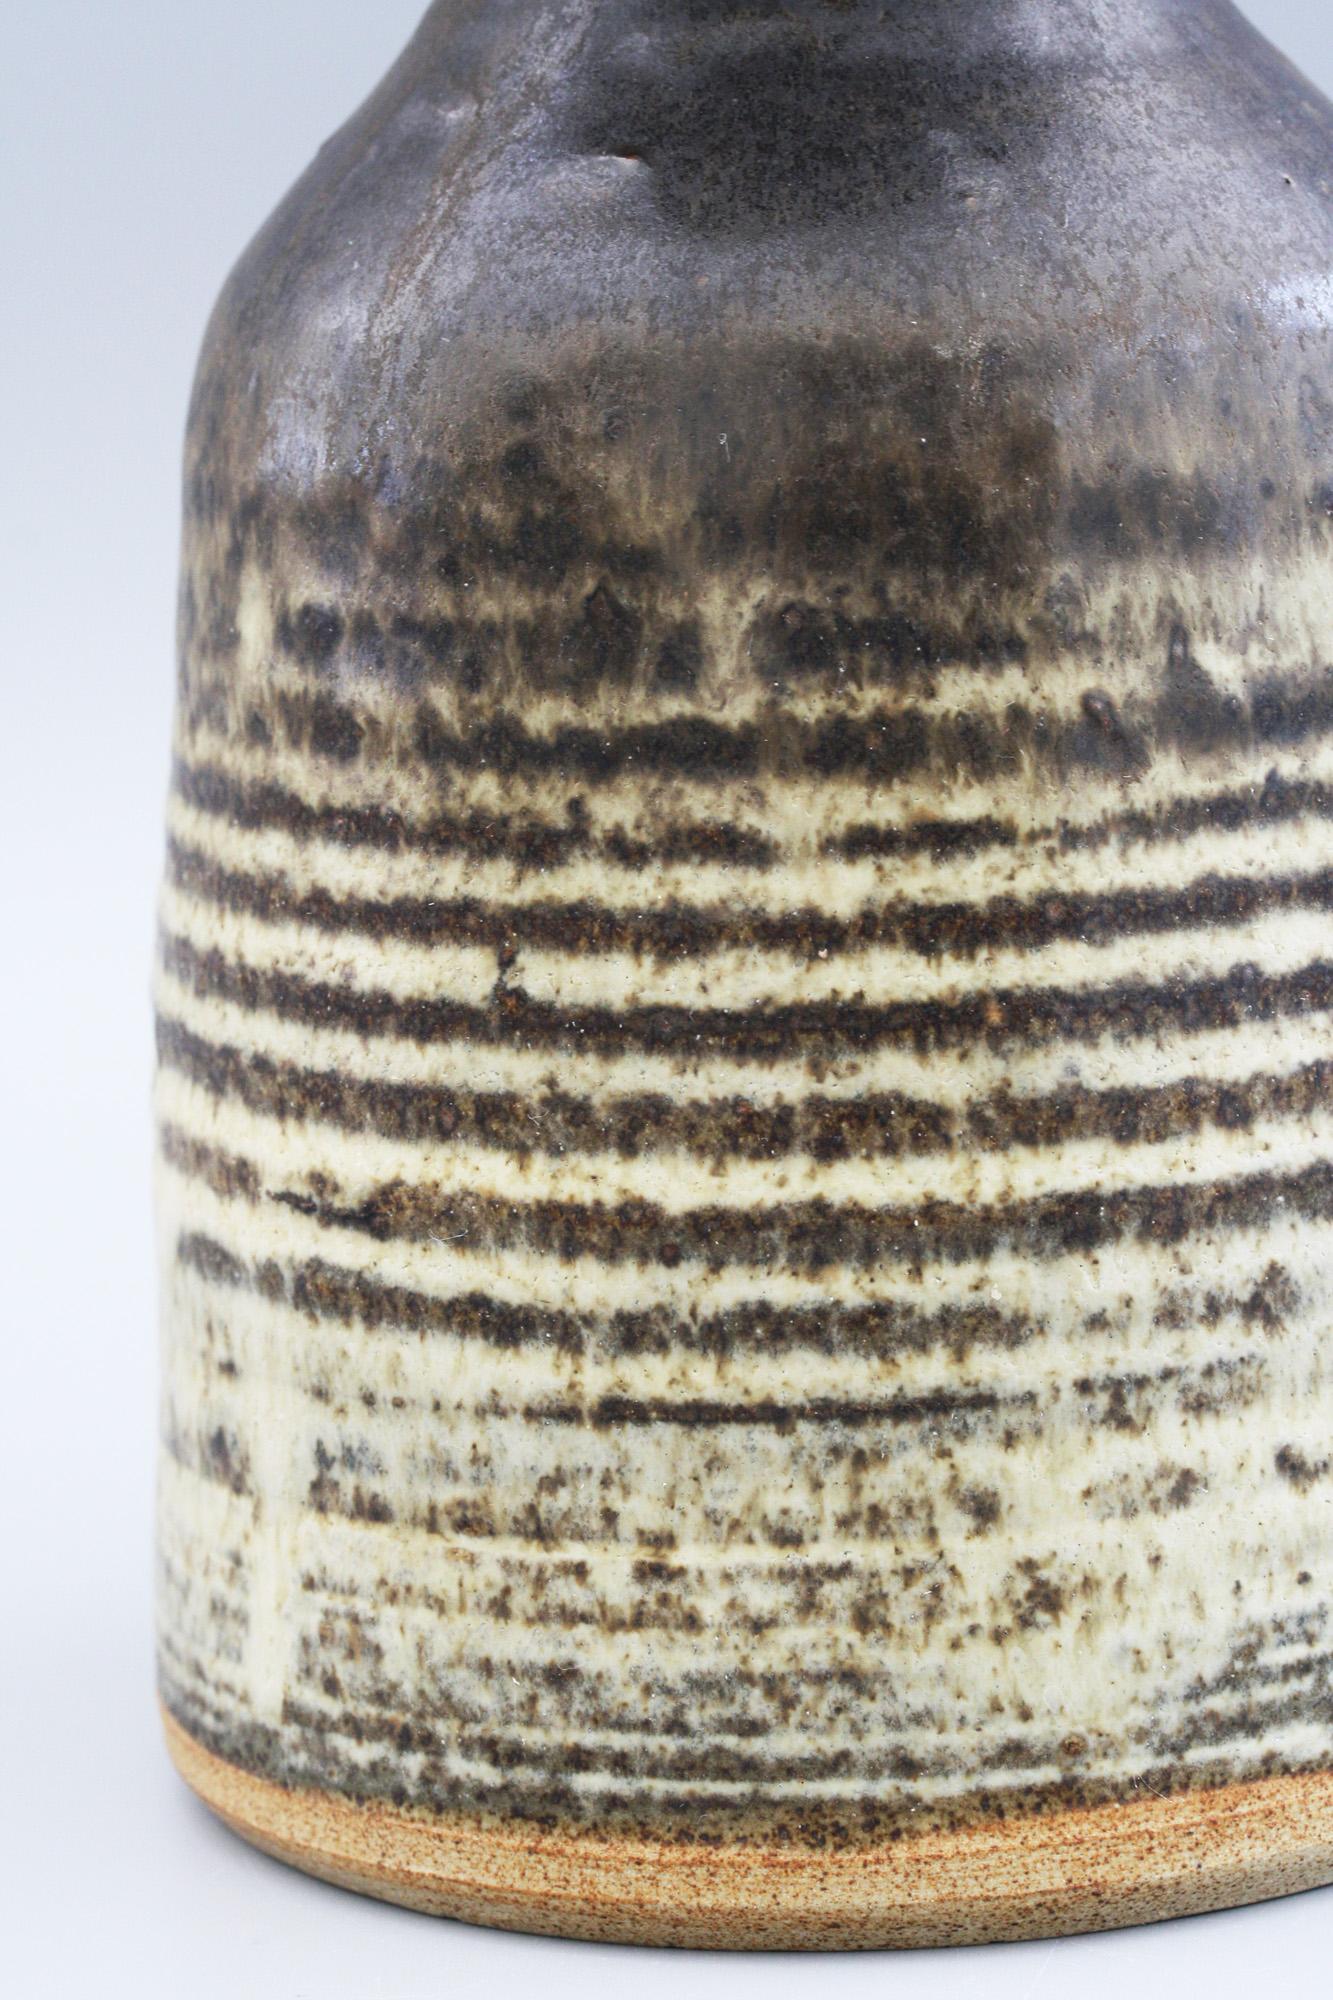 A stylish thrown and glazed stoneware studio pottery vase with a ribbed body attributed to Susan Bennett (b.1954) and dated 1977. The vase has a bell shaped body with a wide flat rounded and unglazed base and has a pinched neck and large trumpet